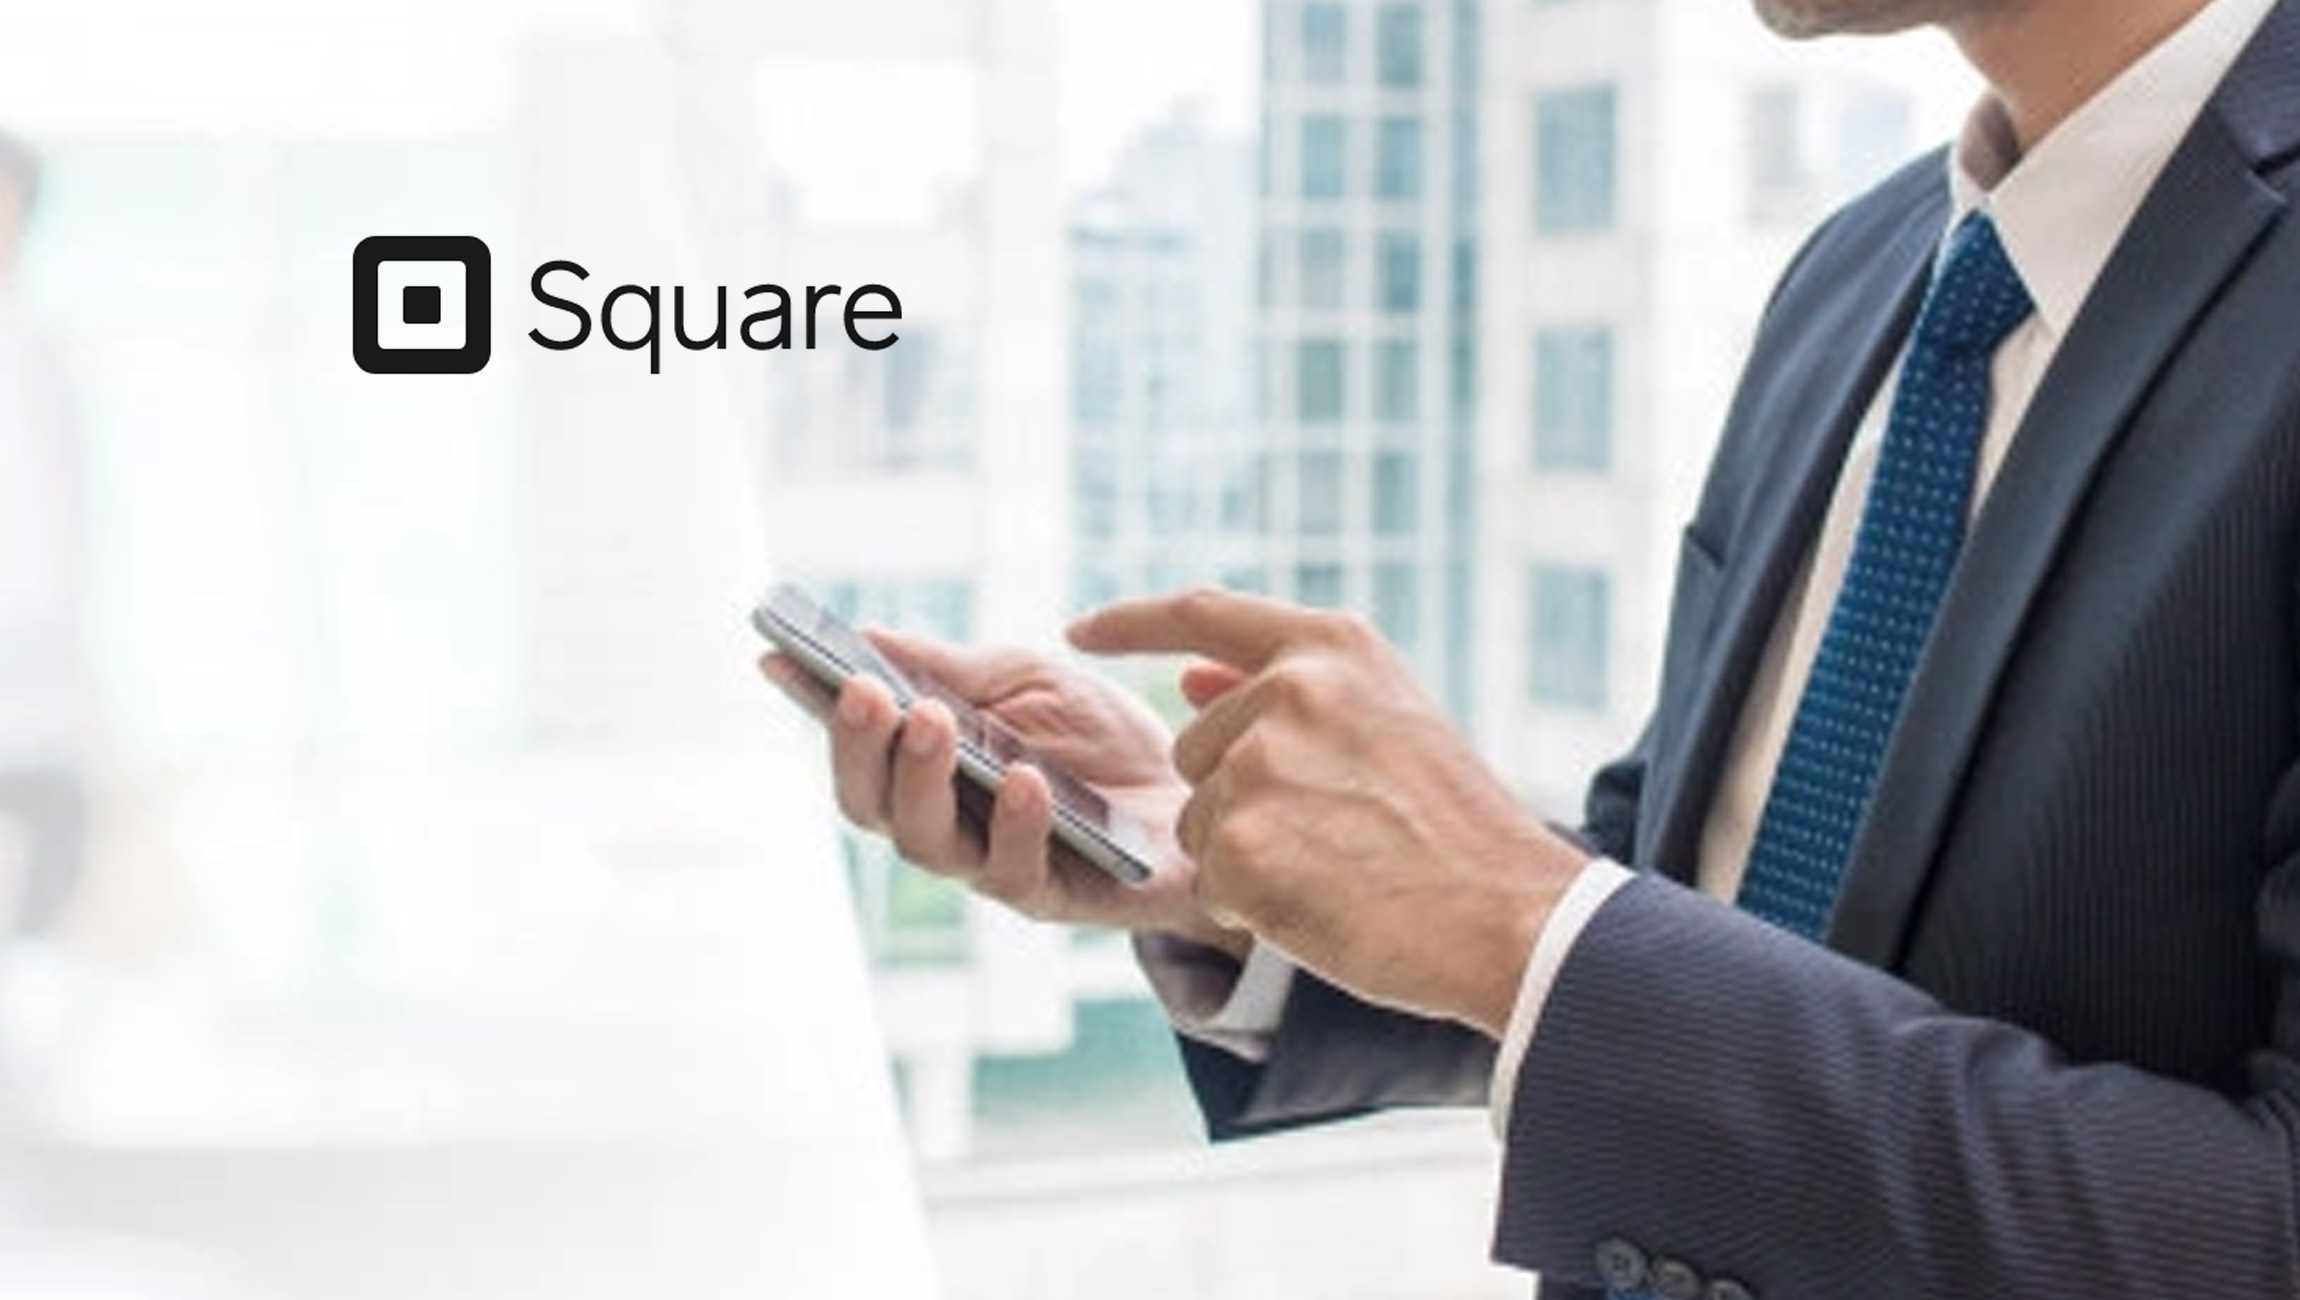 Square and Google Team Up to Help Square Sellers Get Discovered Online